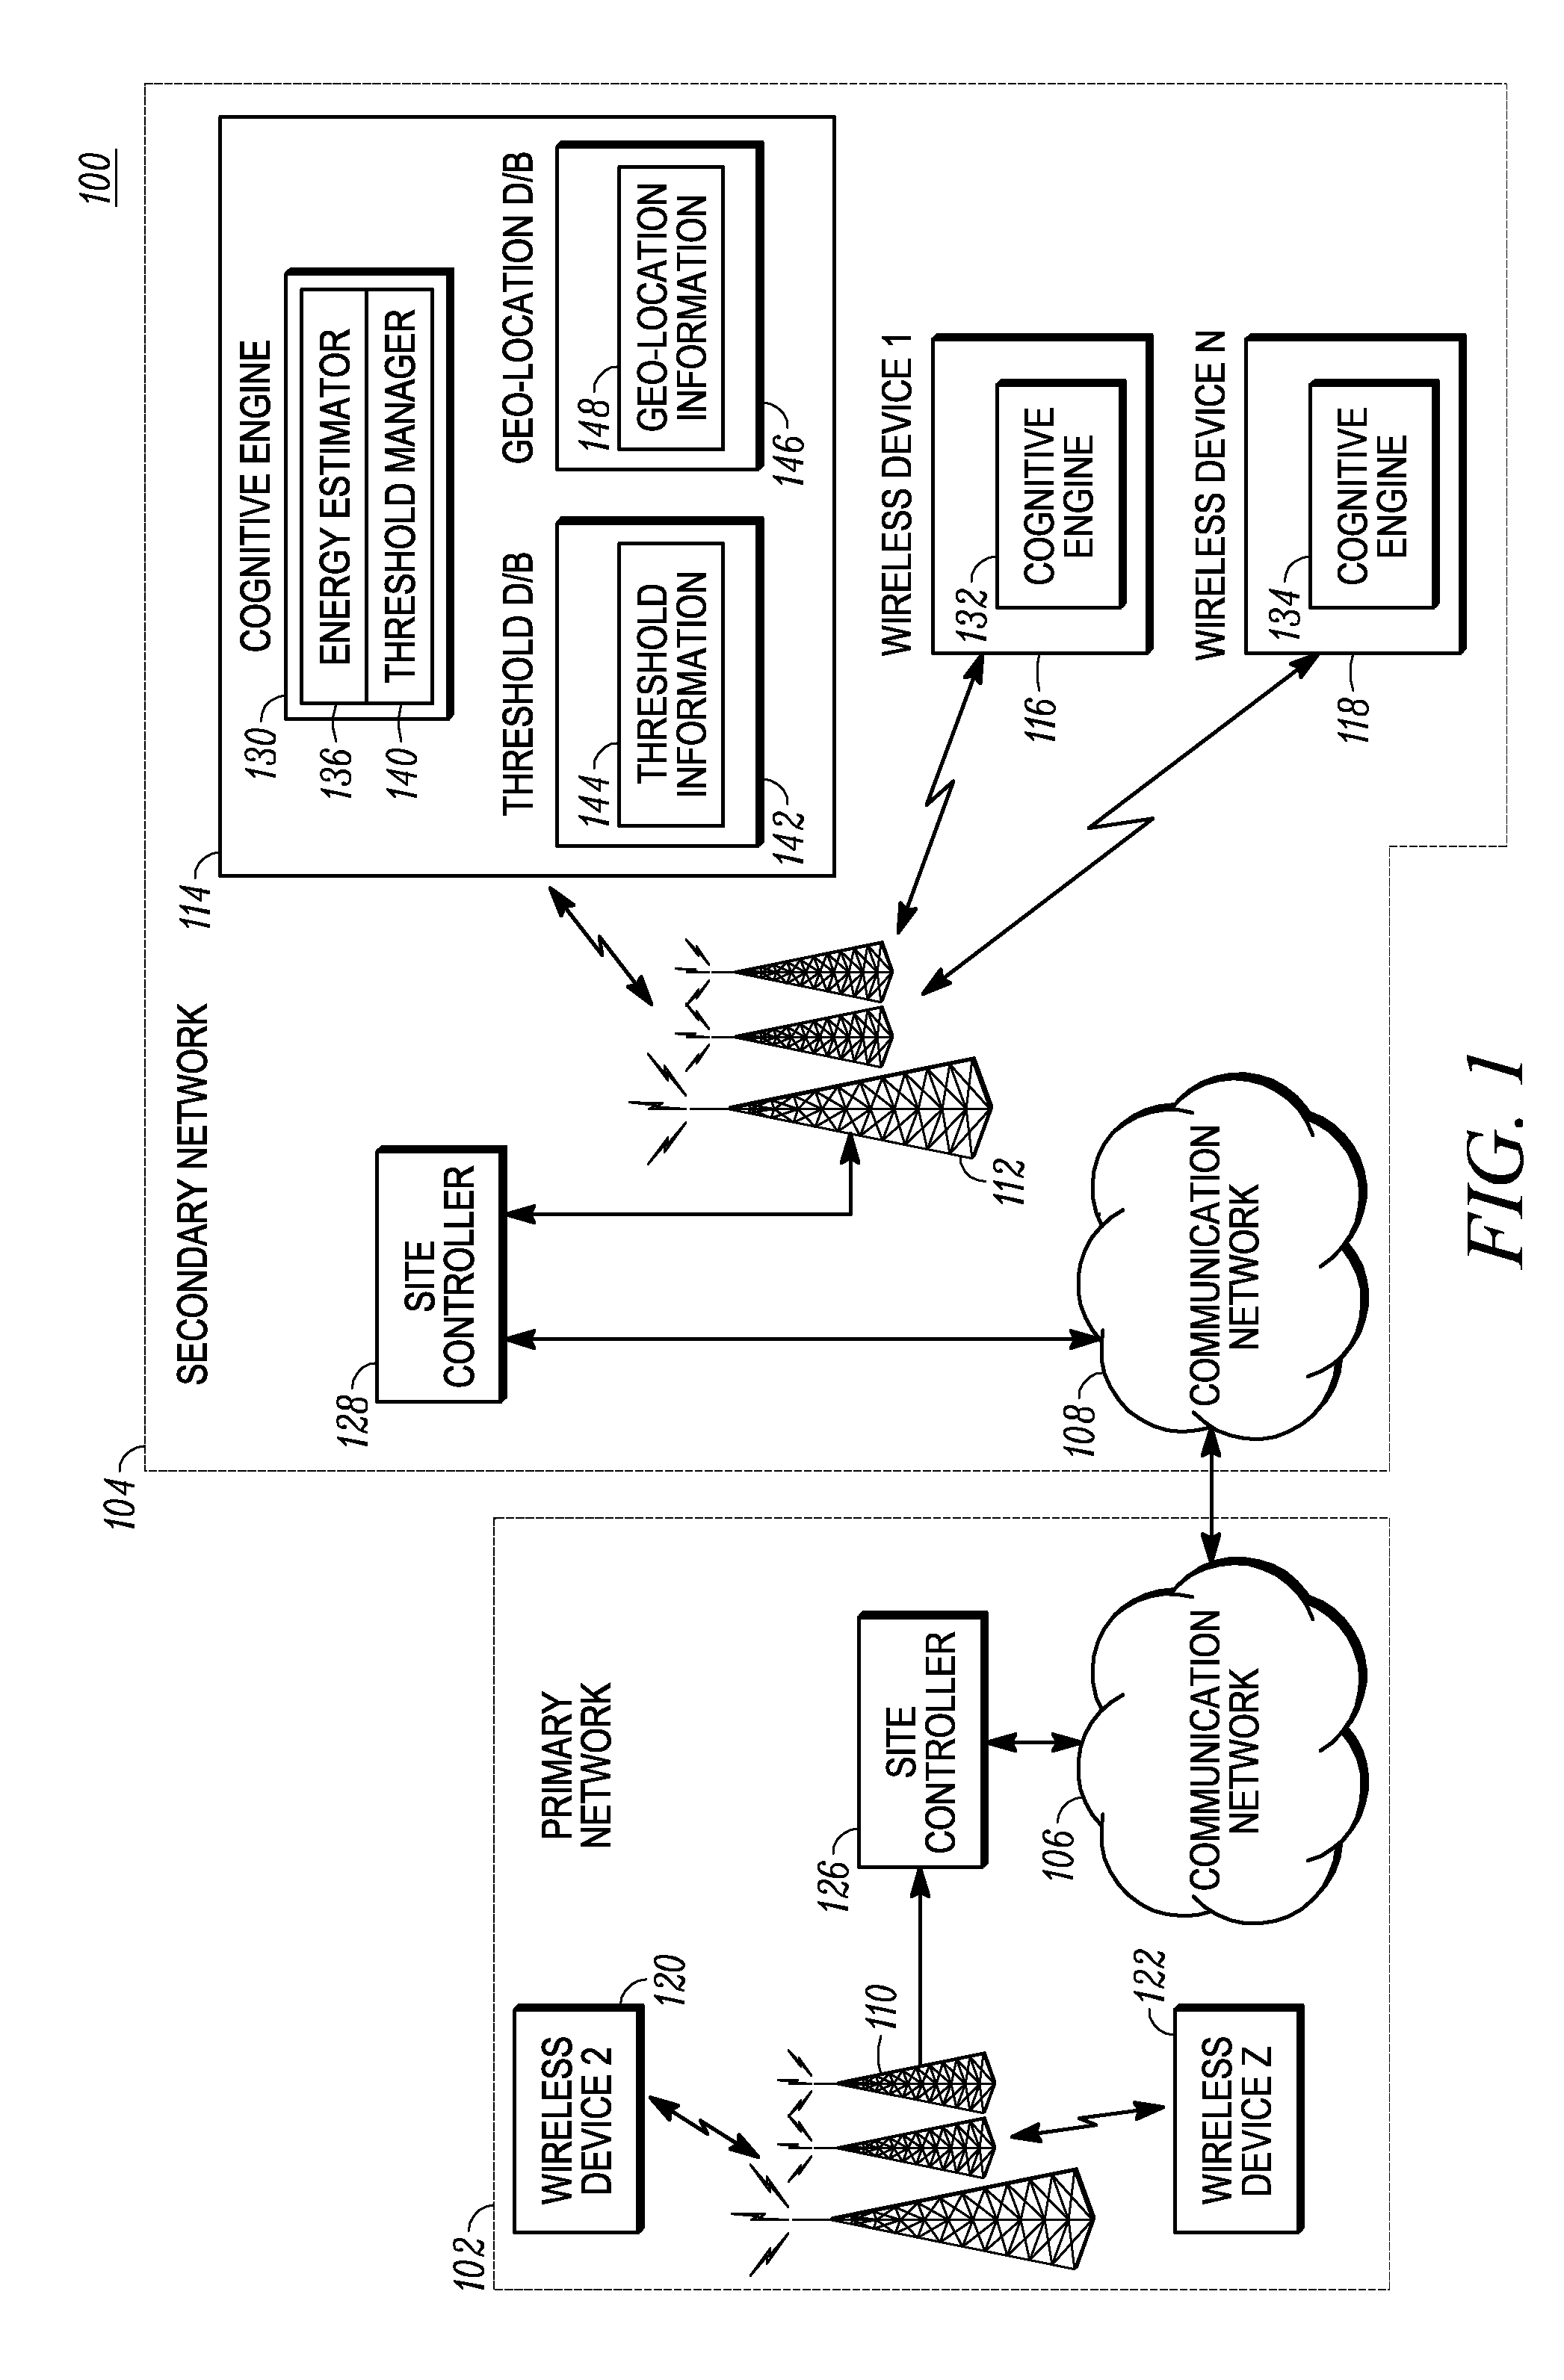 Signal detection in cognitive radio systems